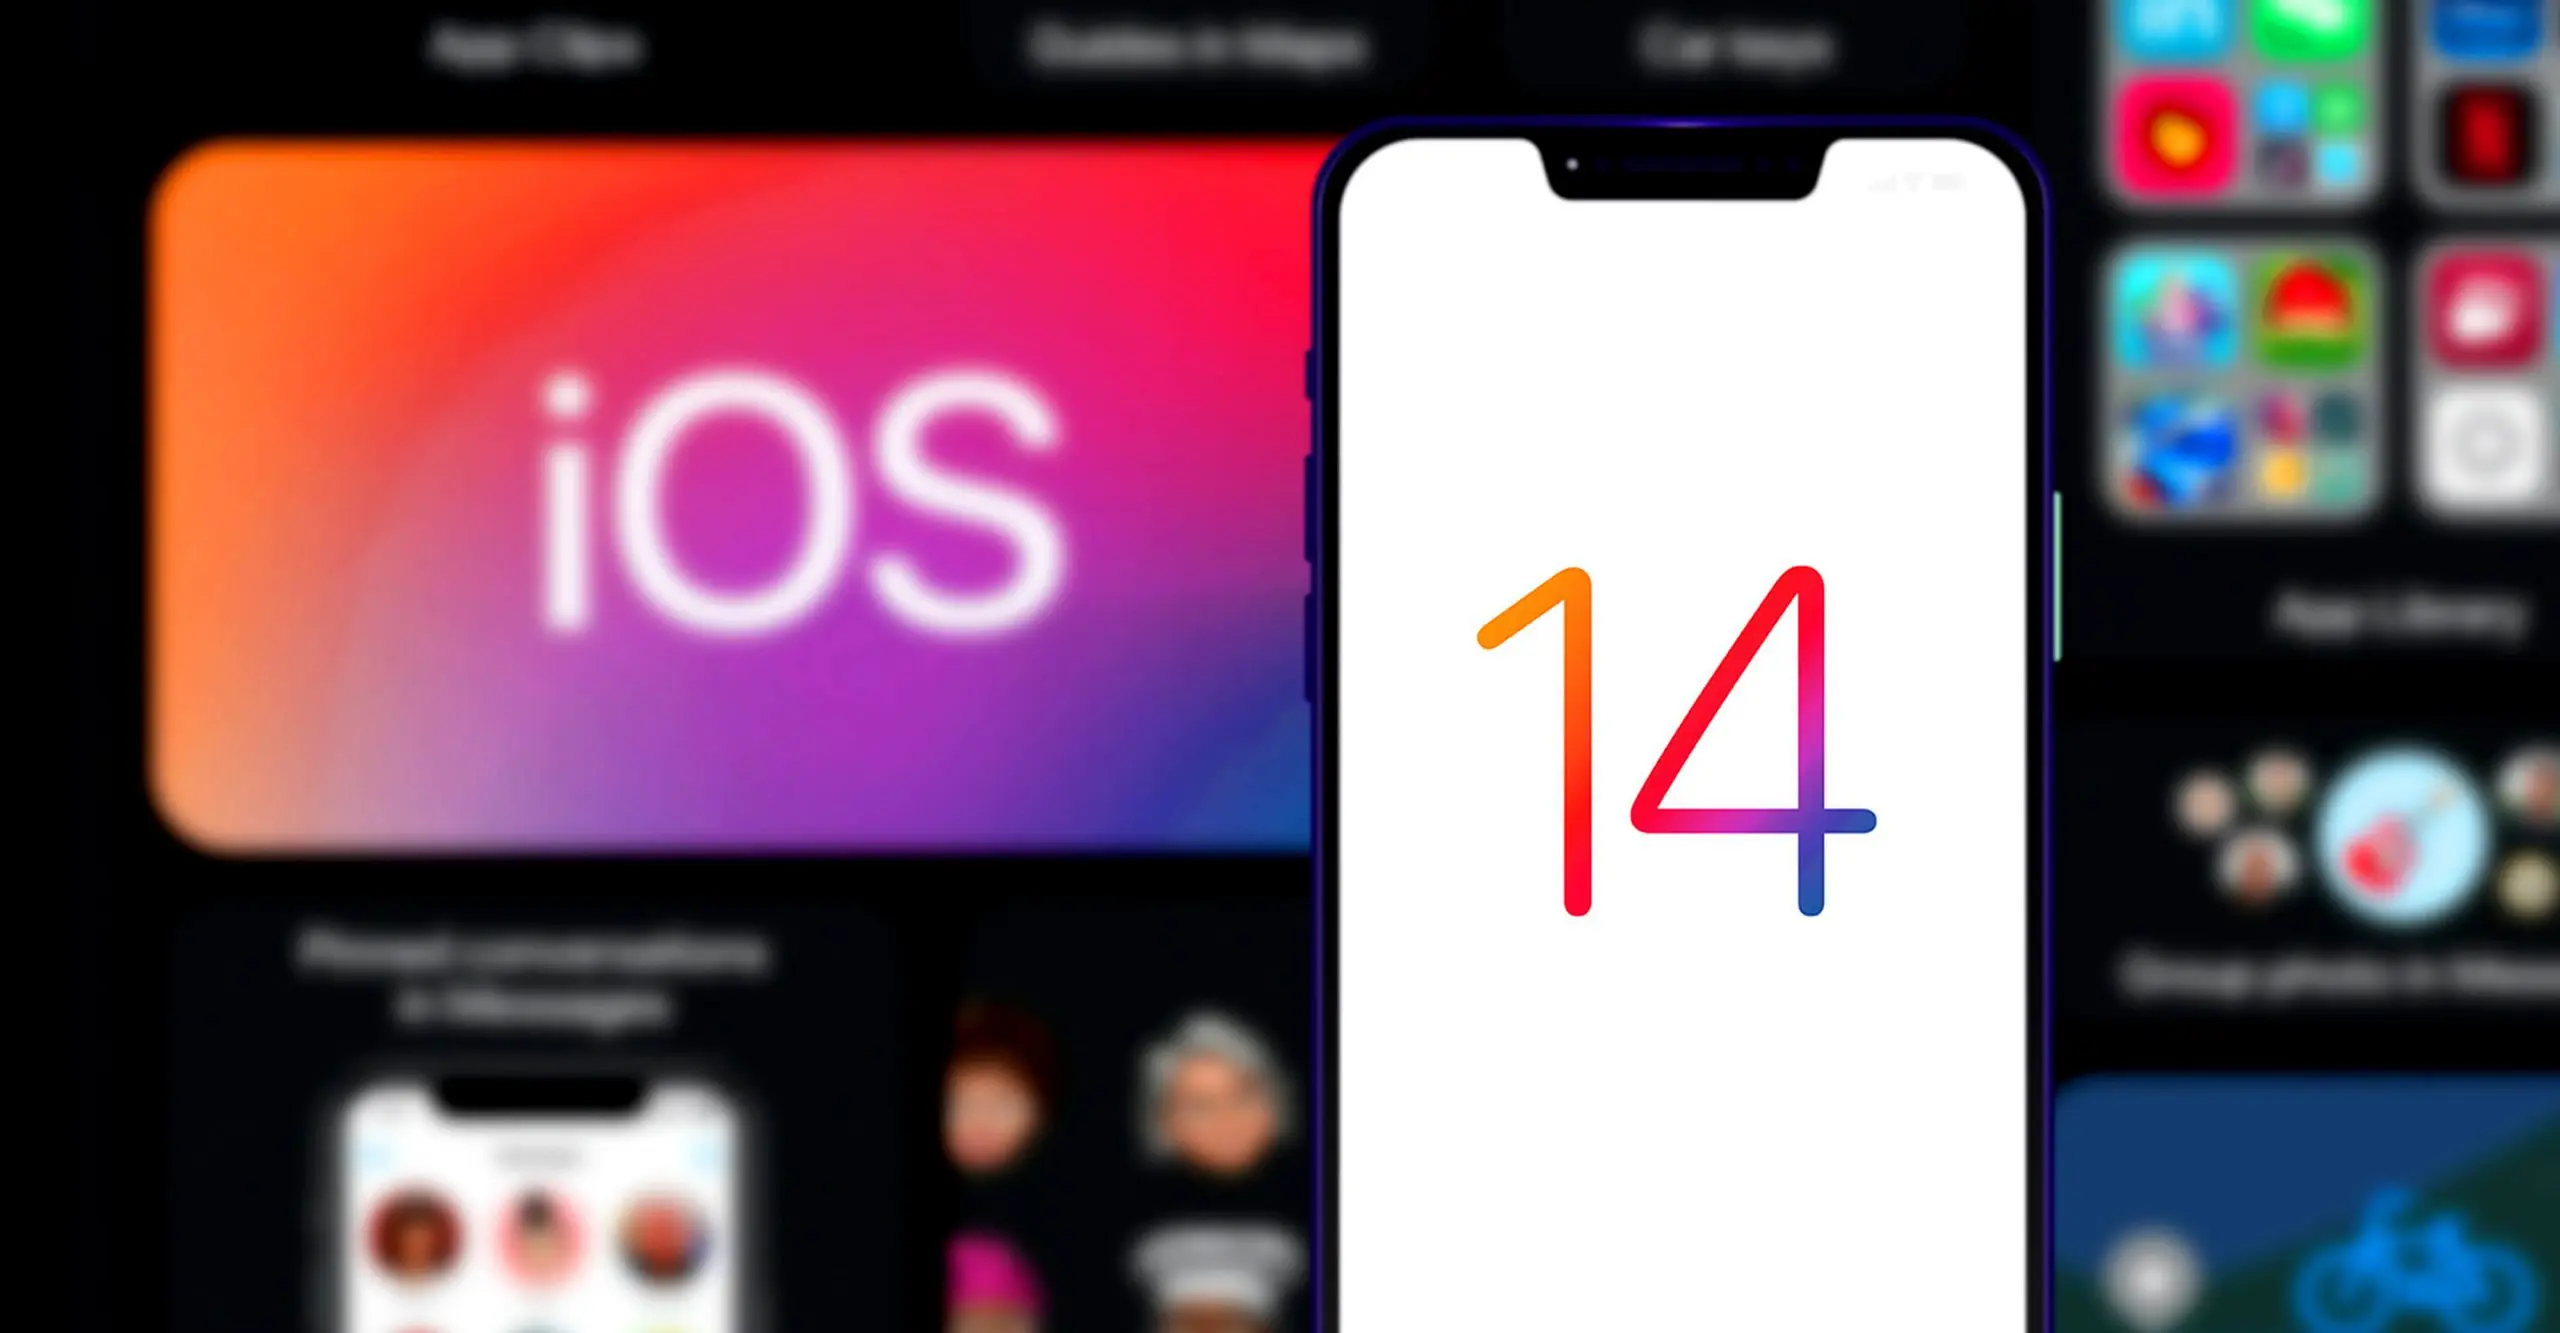 App store in the background with image of iPhone in front with iOS 14 software update